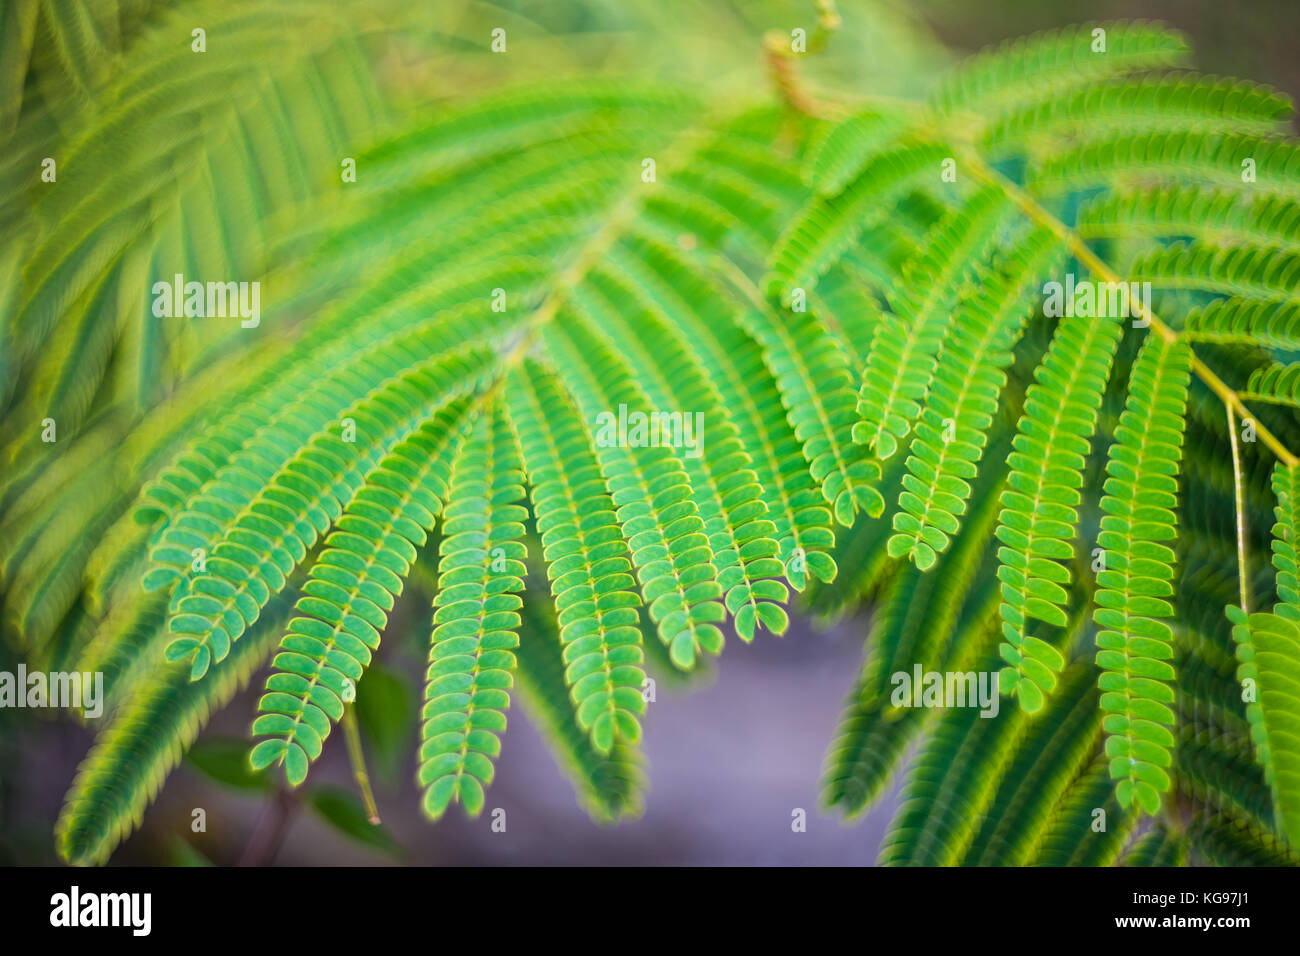 Leaves Of Acacia Pink Mimosa Tree In A Park As A Natural Background Stock Photo Alamy